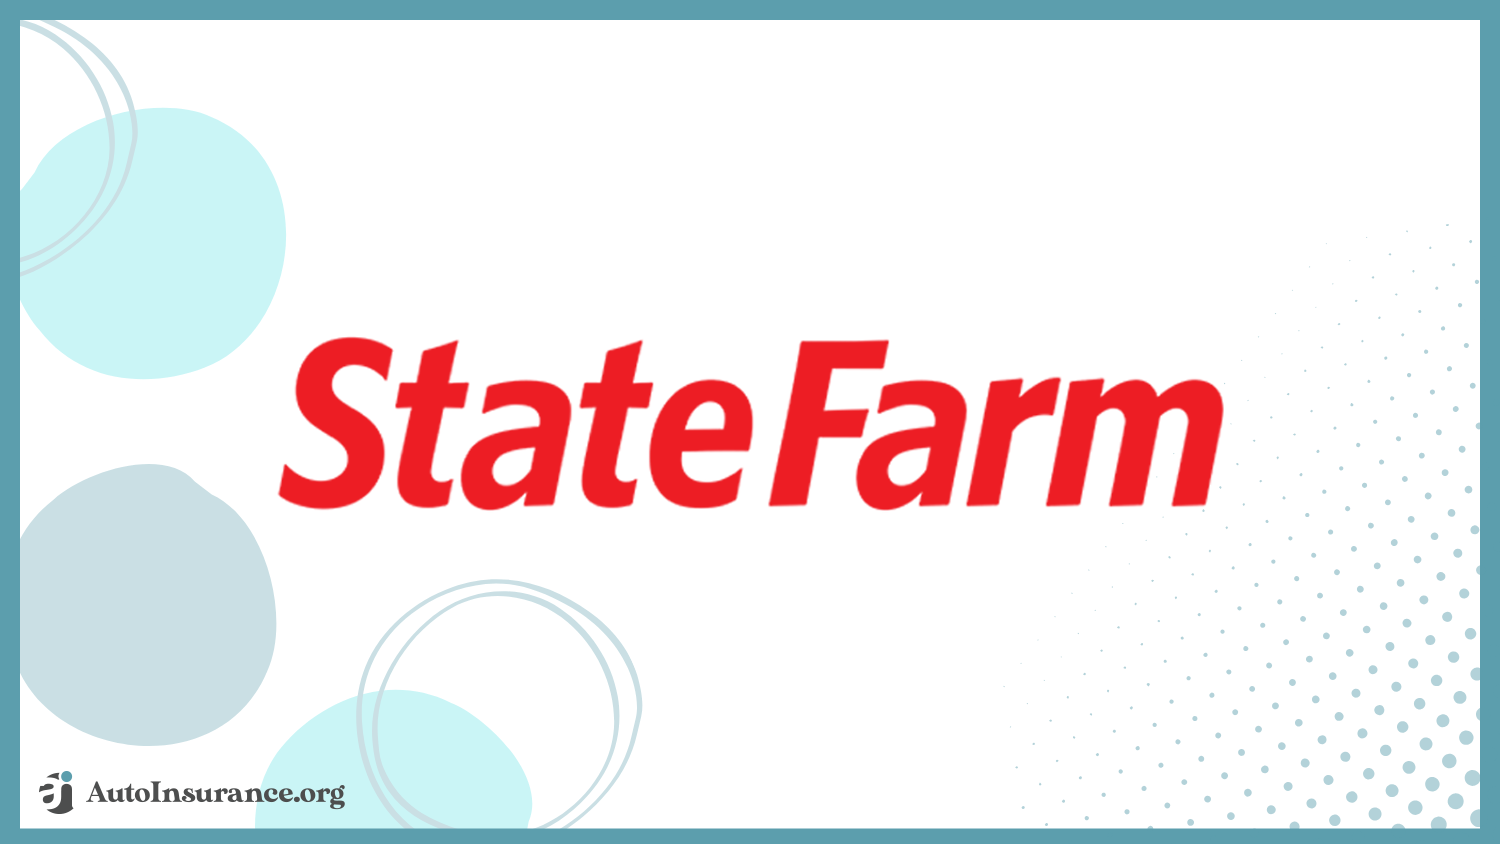 State Farm: Best Auto Insurance for Exotic Cars